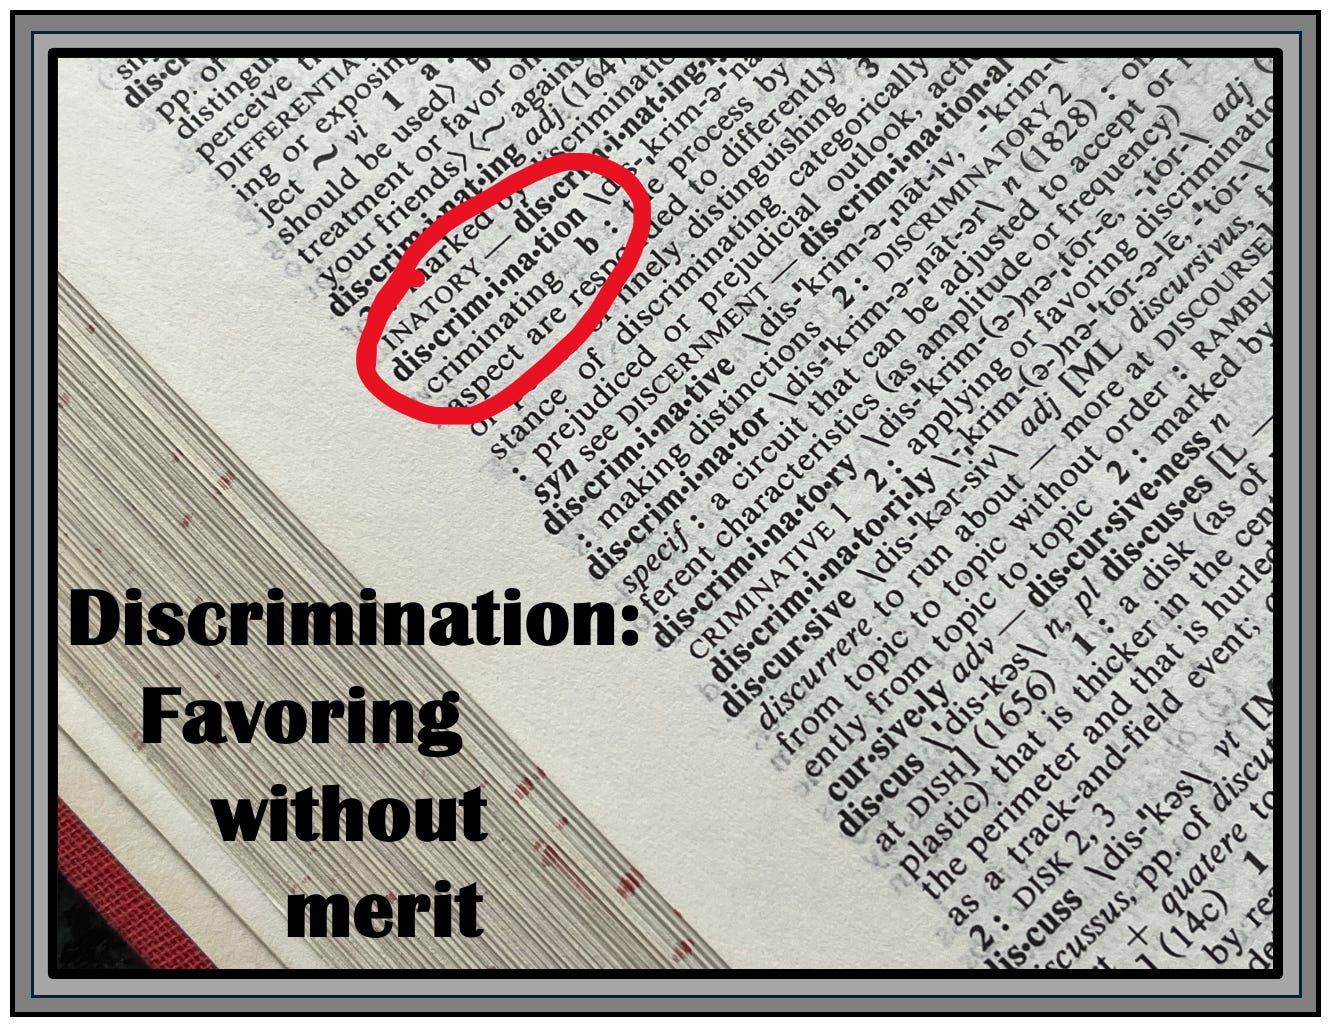 Dictionary open to "discrimination"